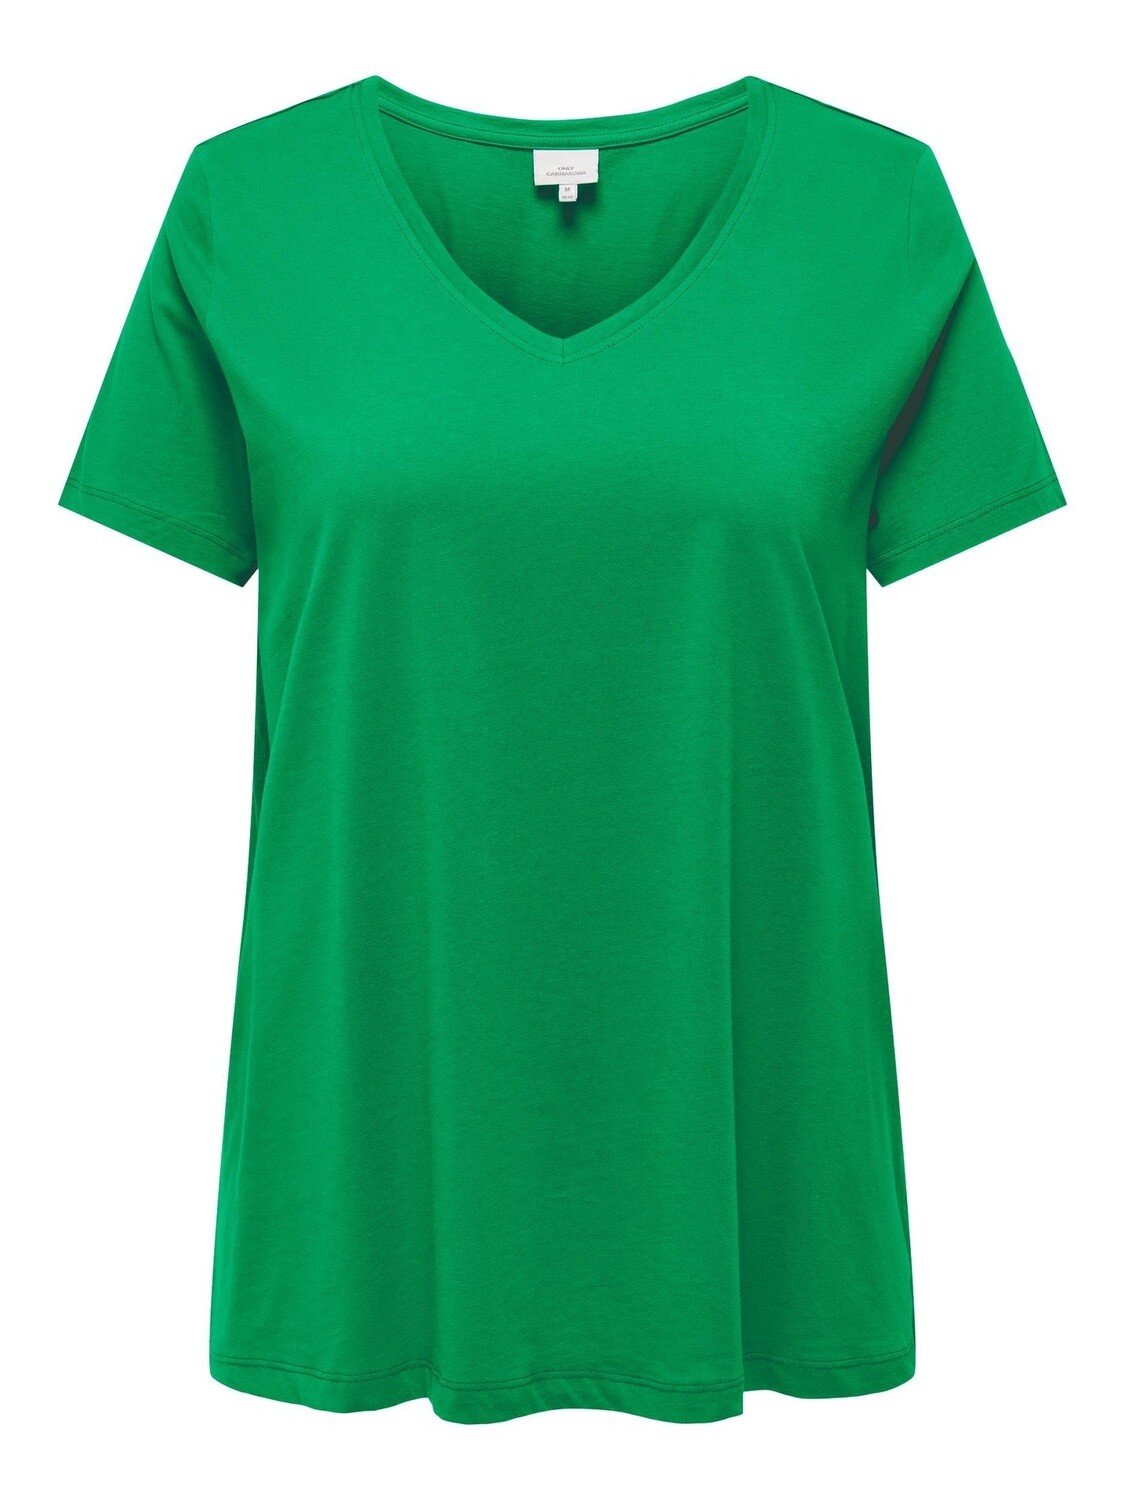 CARBONNIE LIFE S/S V-NECK A-SHAPE TEE, maat: S-42/44, kleur: Green Bee